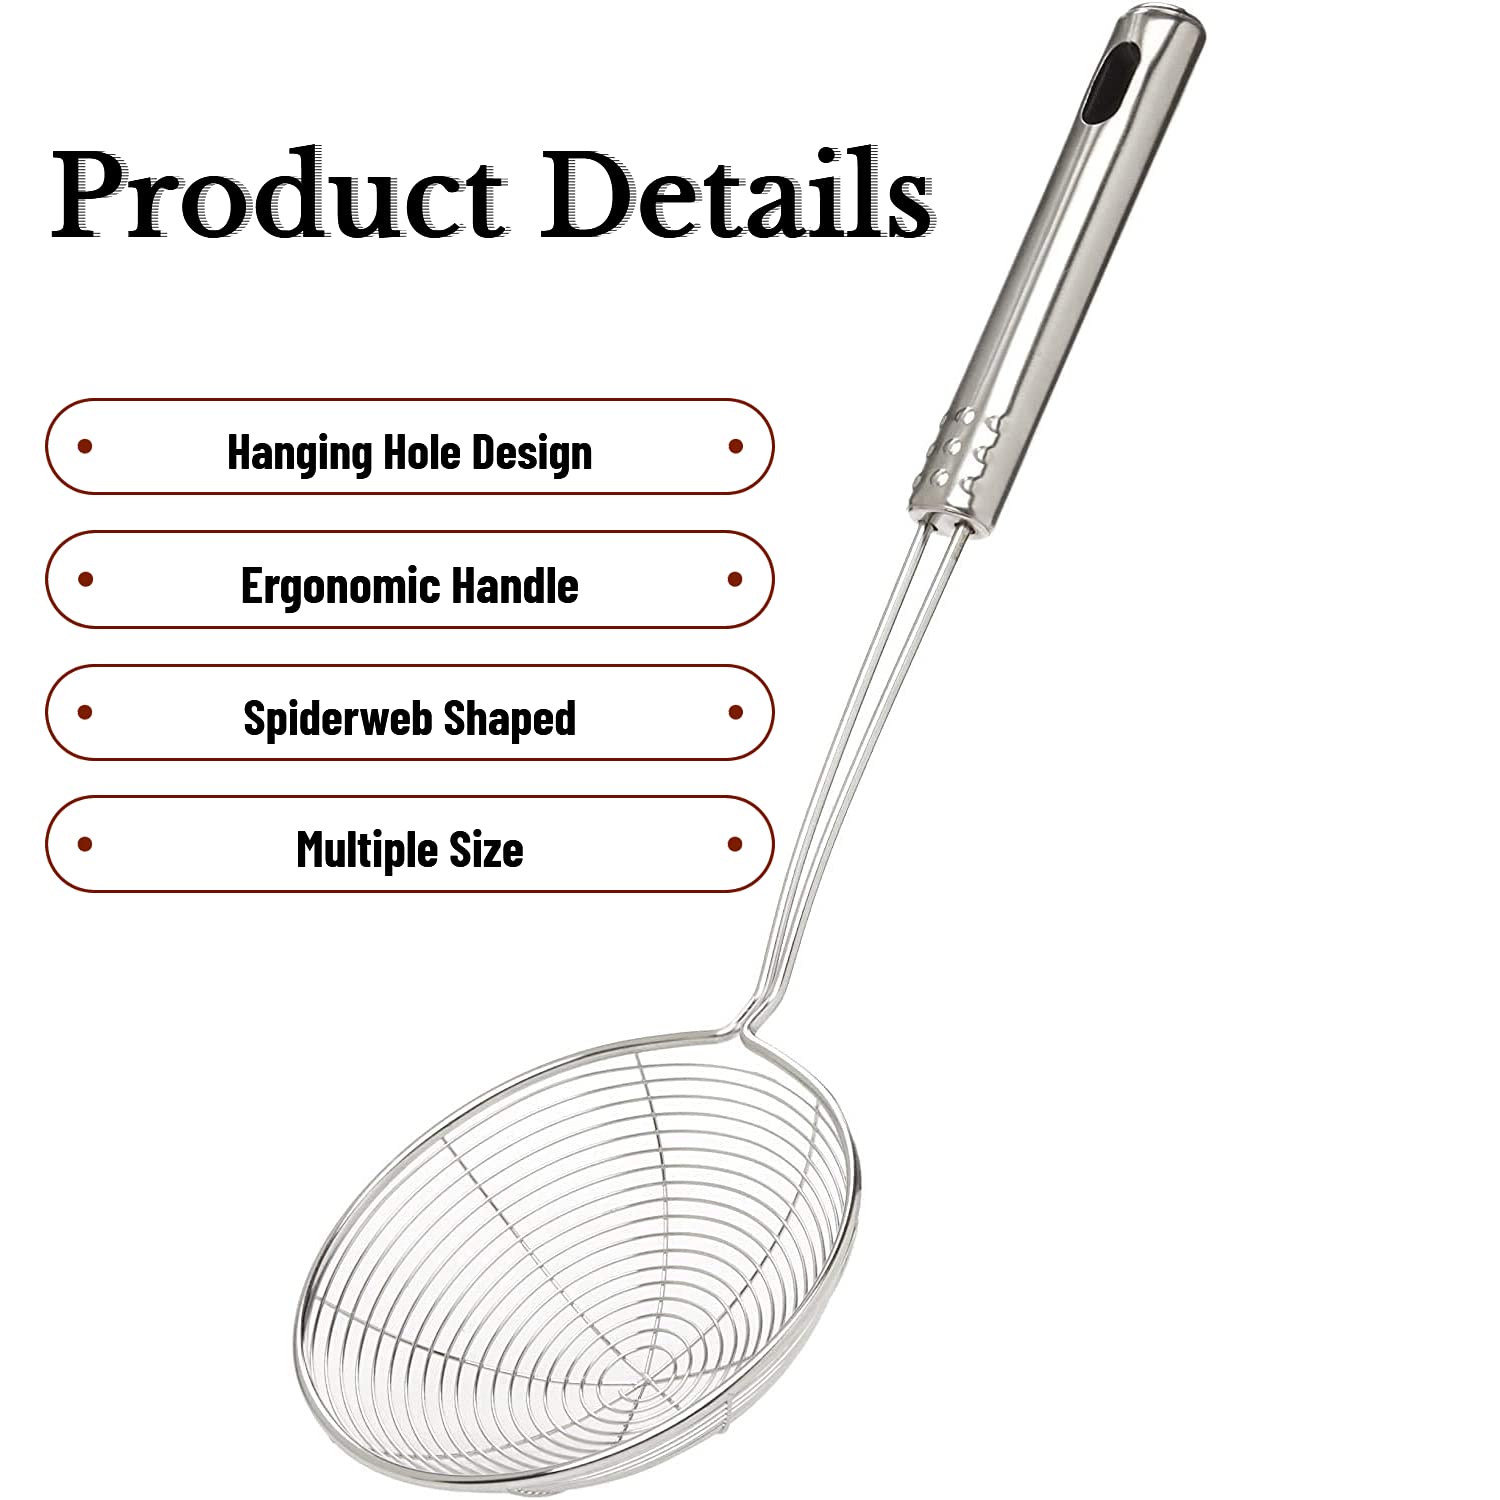 Spider Strainer Skimmer Spoon, HSpiow Set of 3 Sizes Frying Spoon Stainless Steel Fryer Scoop Wire Strainer Ladle with Long Handle for Kitchen Frying Cooking Food Pasta